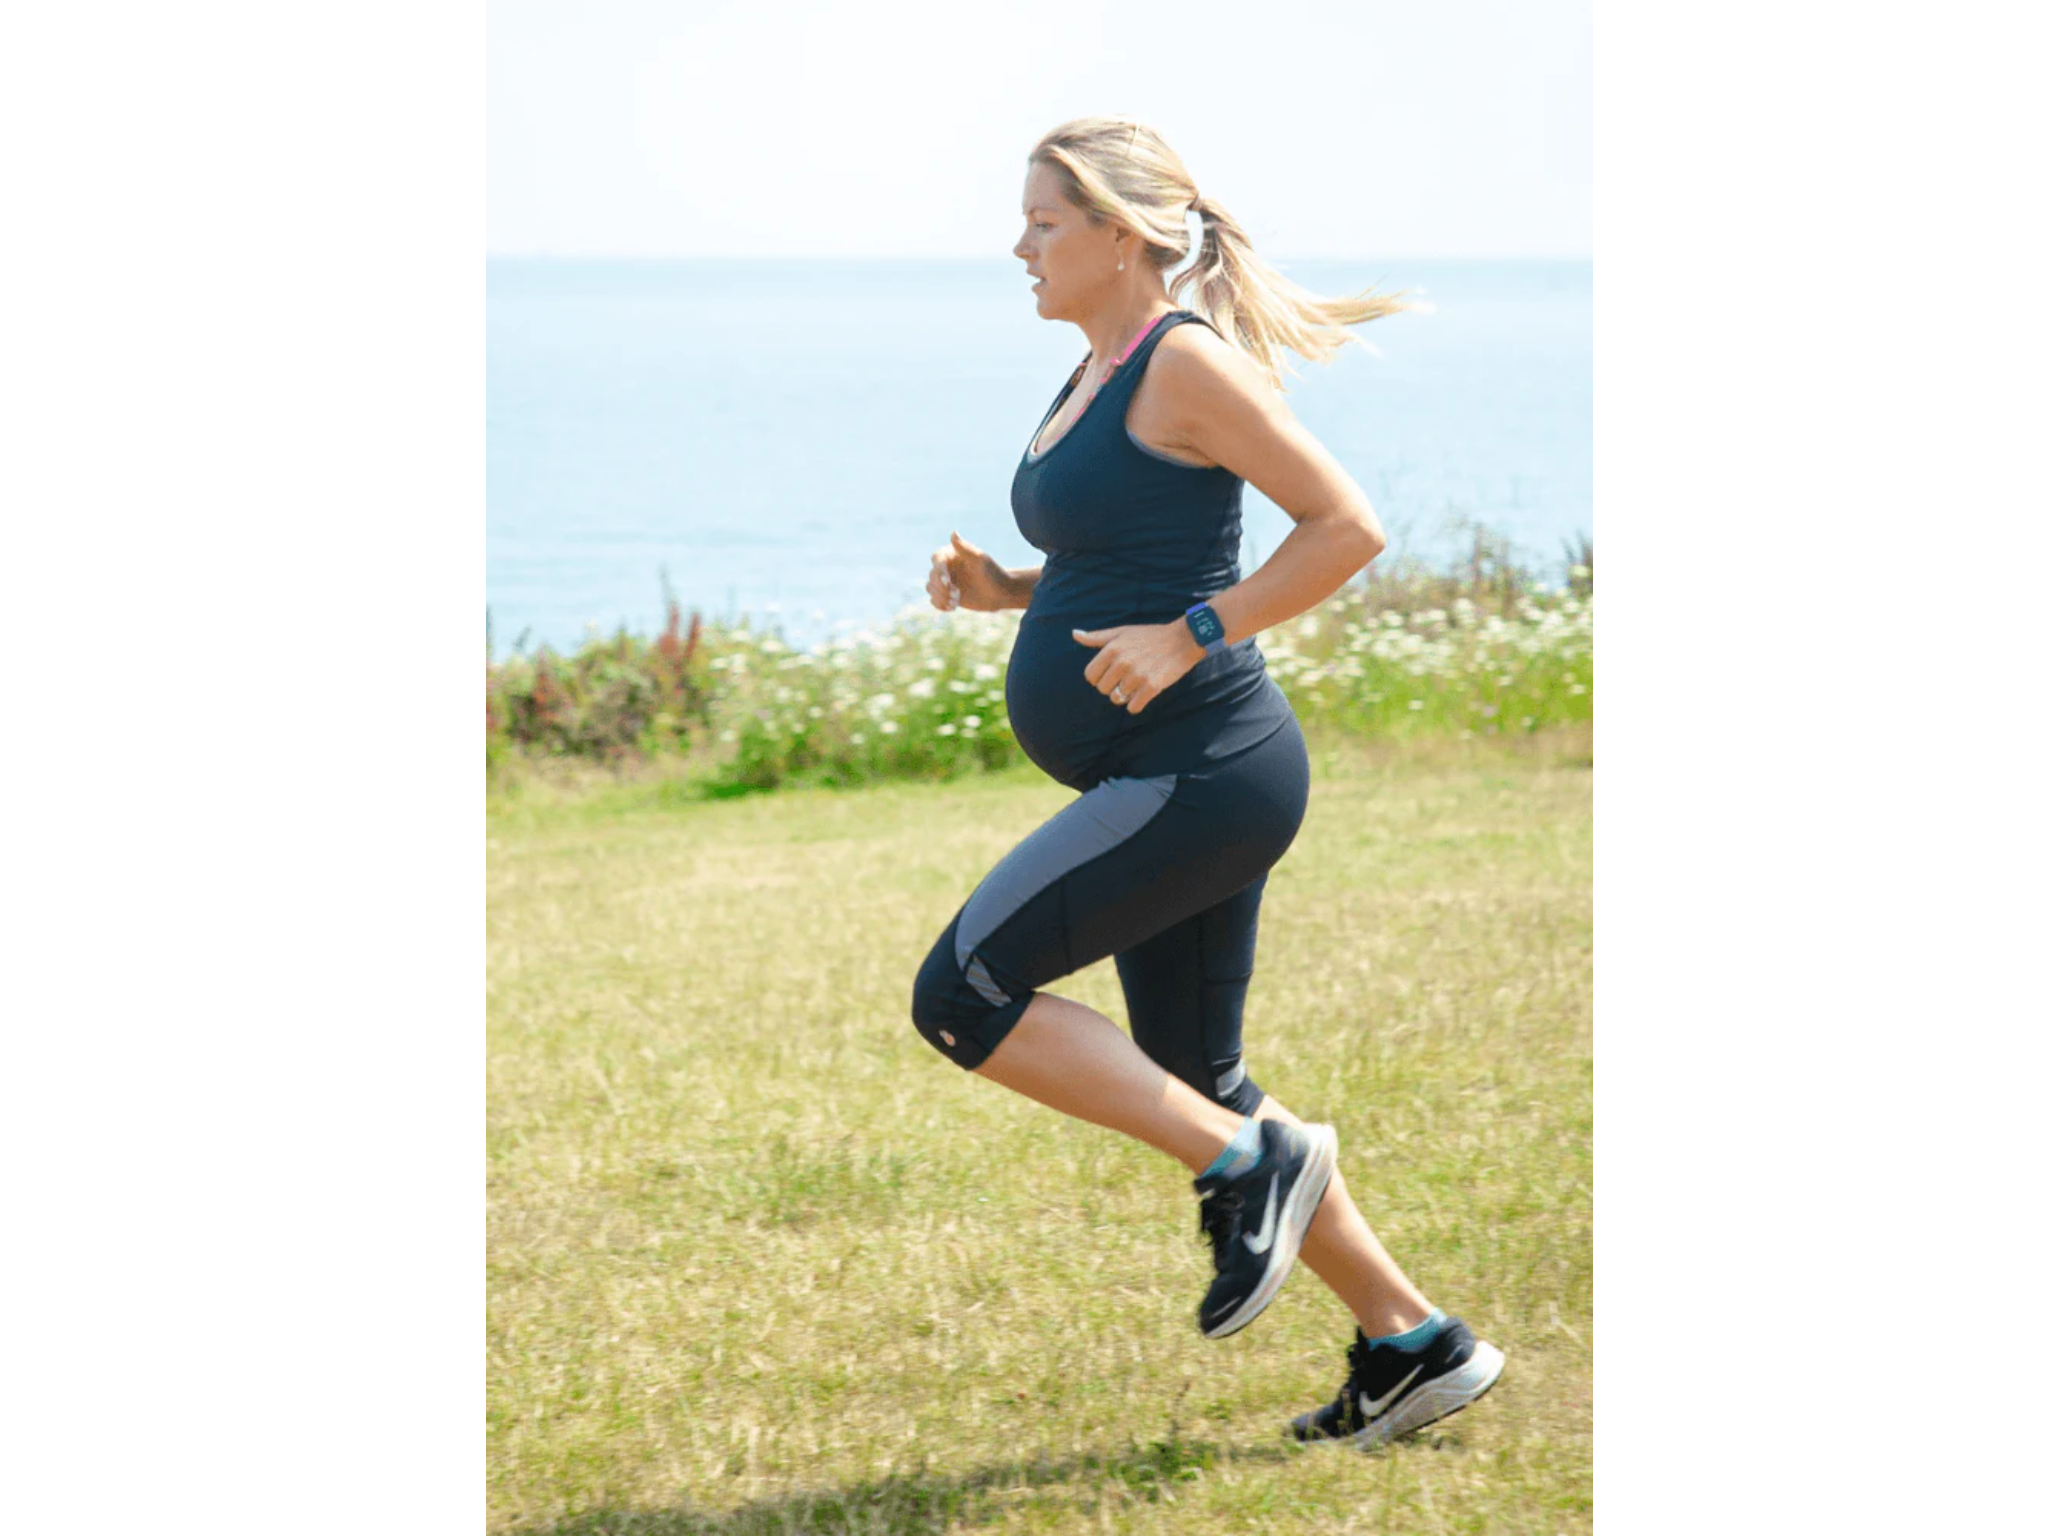 Best maternity sportswear: Gym leggings, tracksuits, sports bras and